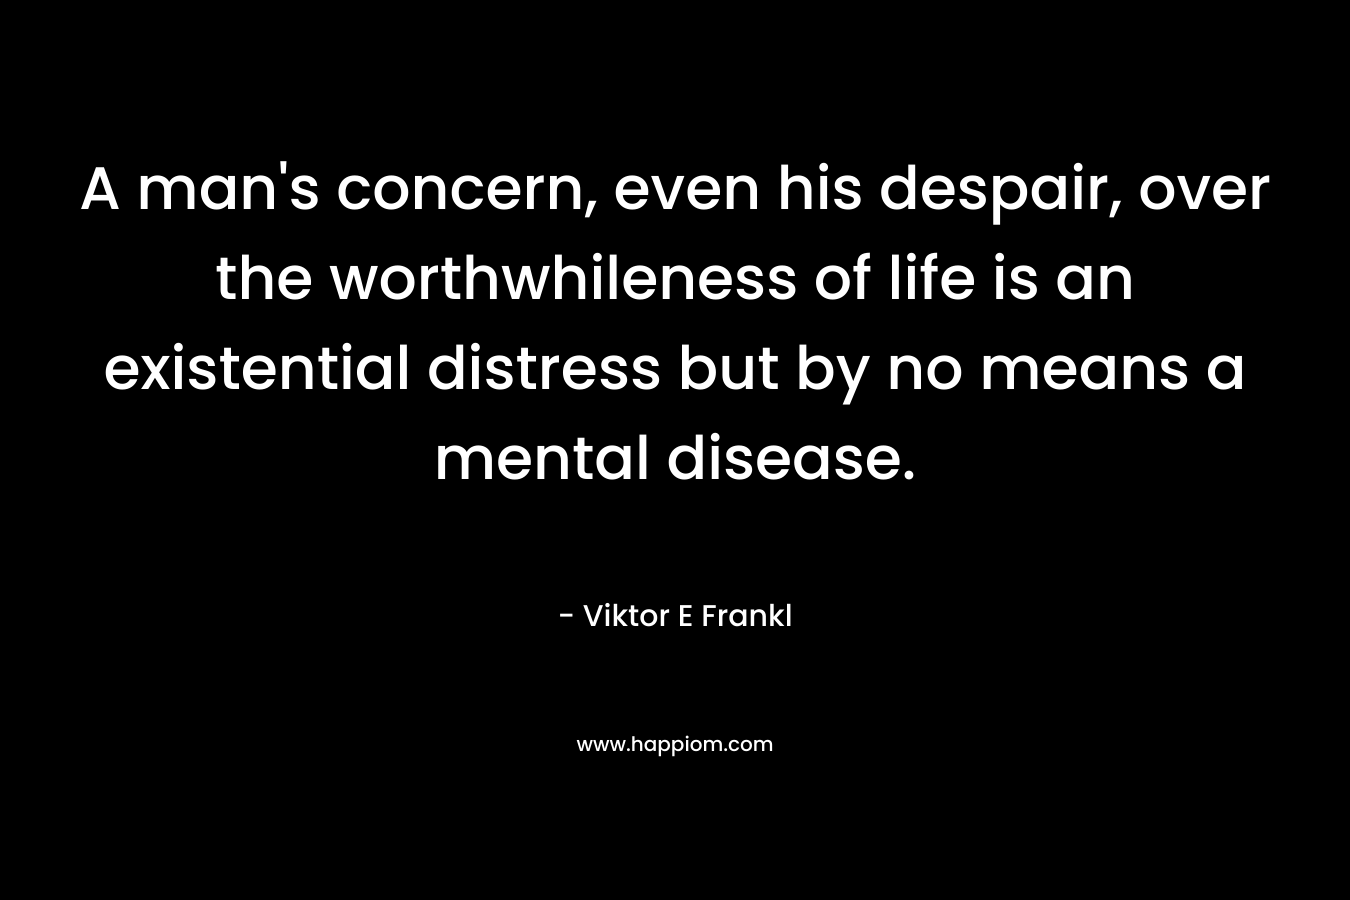 A man's concern, even his despair, over the worthwhileness of life is an existential distress but by no means a mental disease.